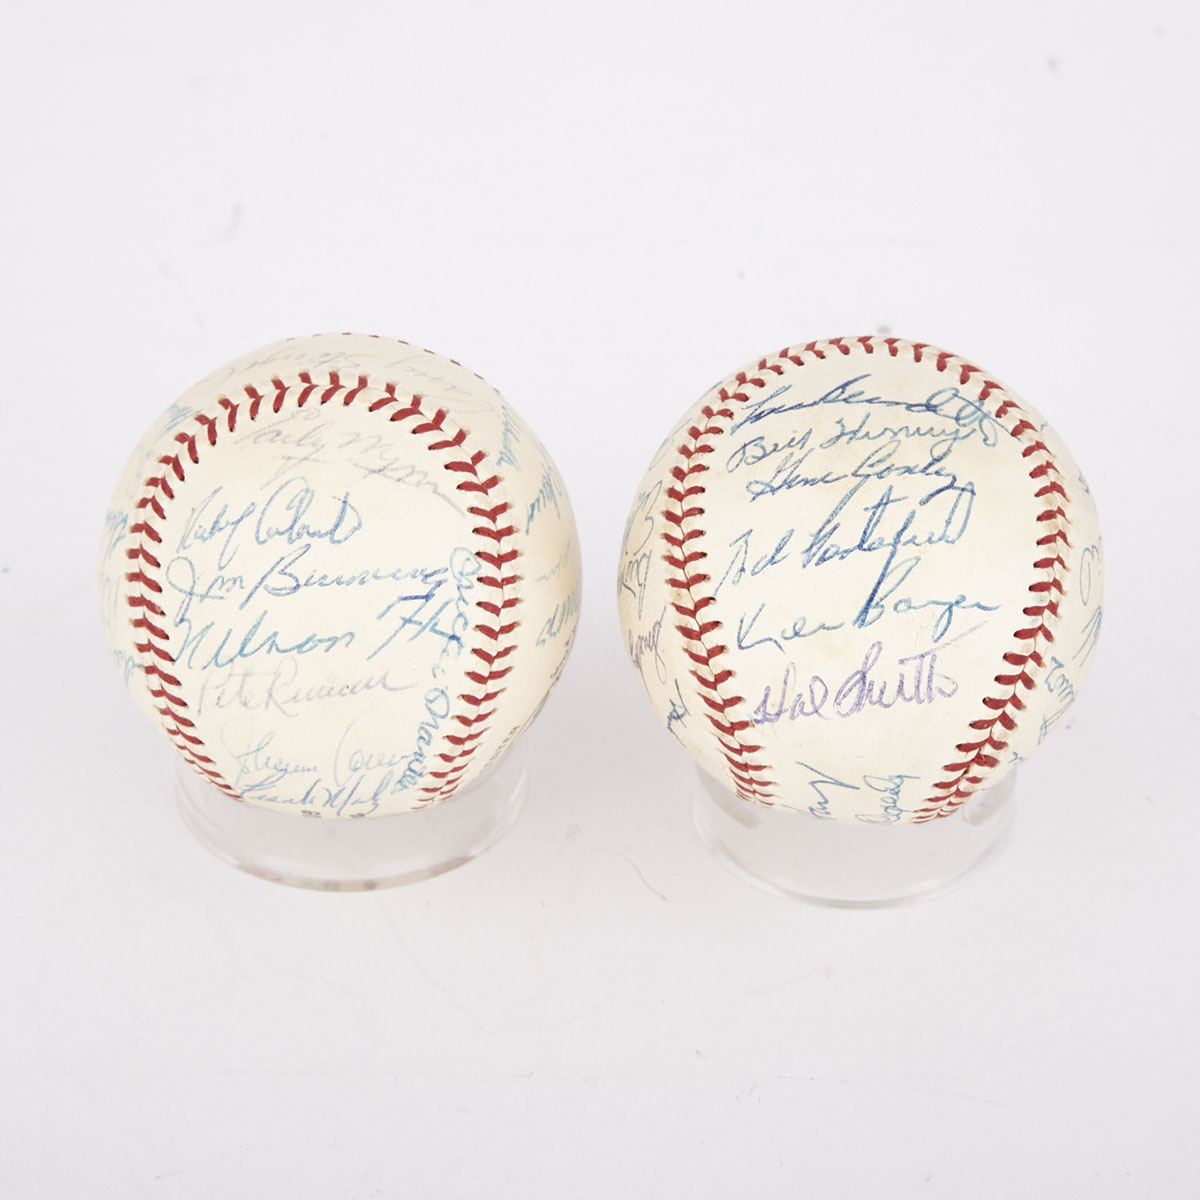 [Baseball] Two American and National League 1959 All Star Team Signed Baseballs